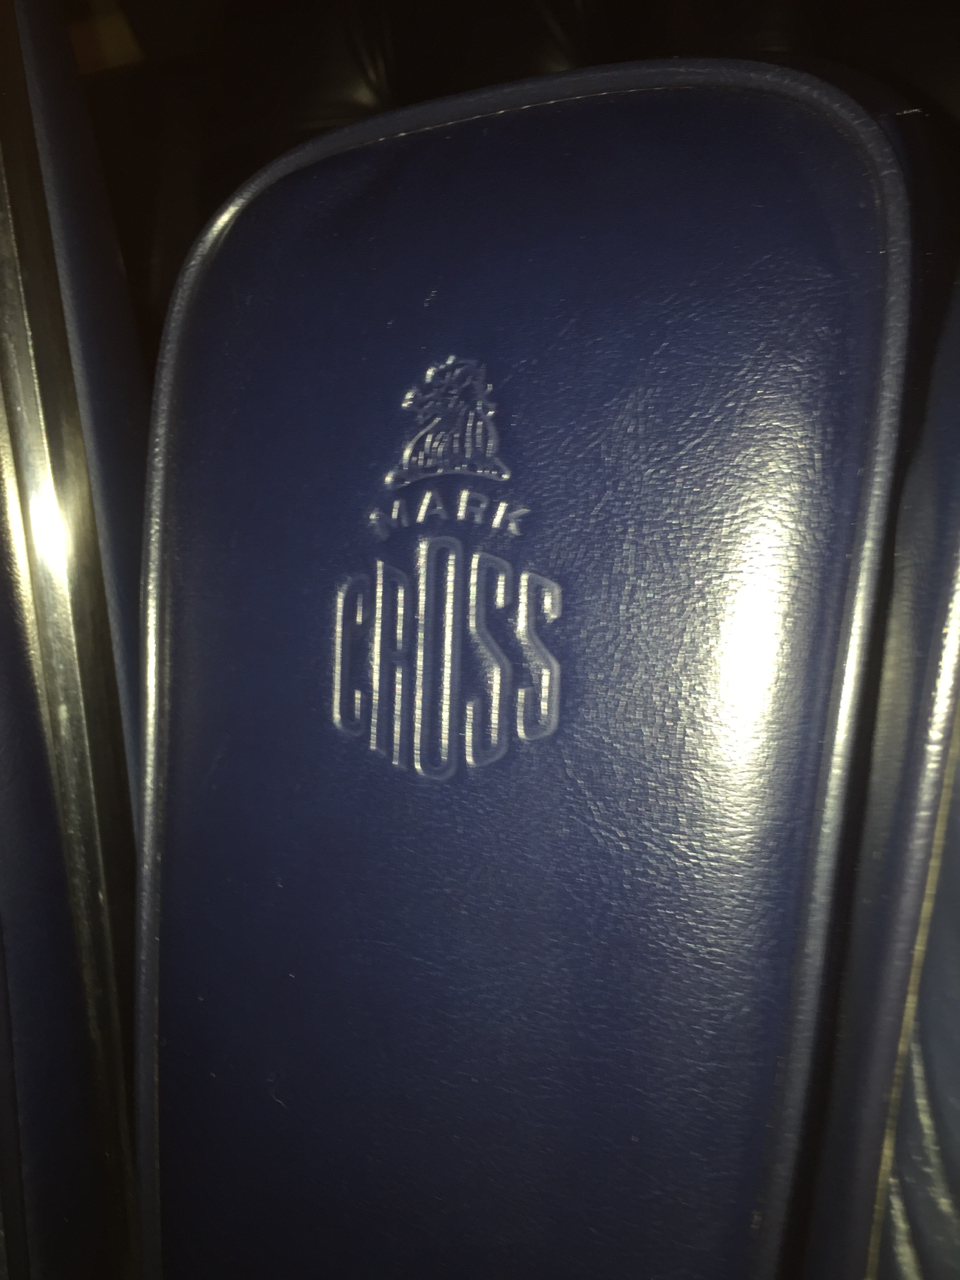 The front armrest, when in the up position, has the Mark Cross logo embossed in the leather.